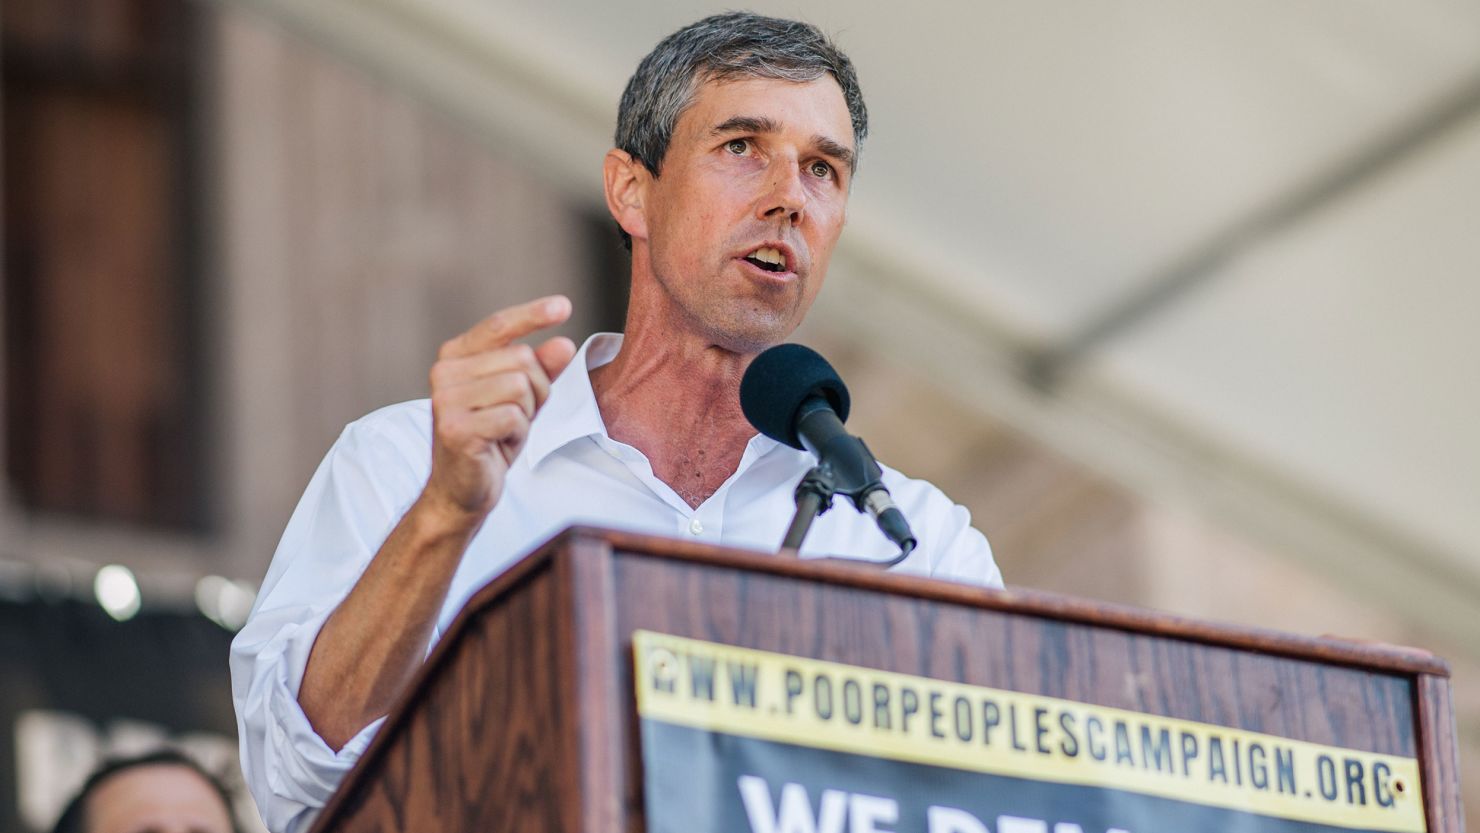 Former U.S. Rep. Beto O'Rourke speaks during the Georgetown to Austin March for Democracy rally on July 31, 2021 in Austin, Texas. 